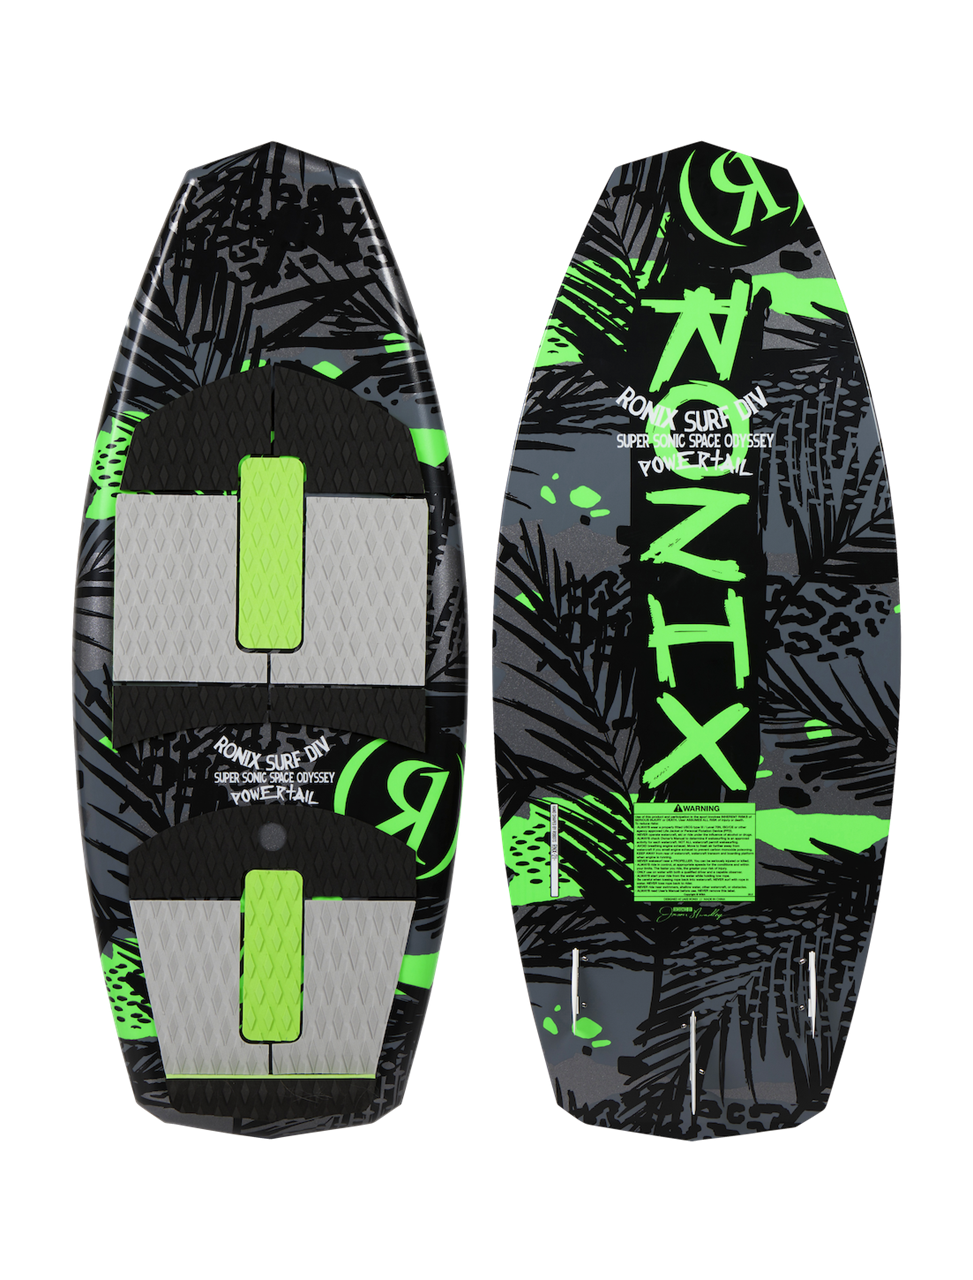 Super Sonic Space Odyssey - Powertail - Black / Green